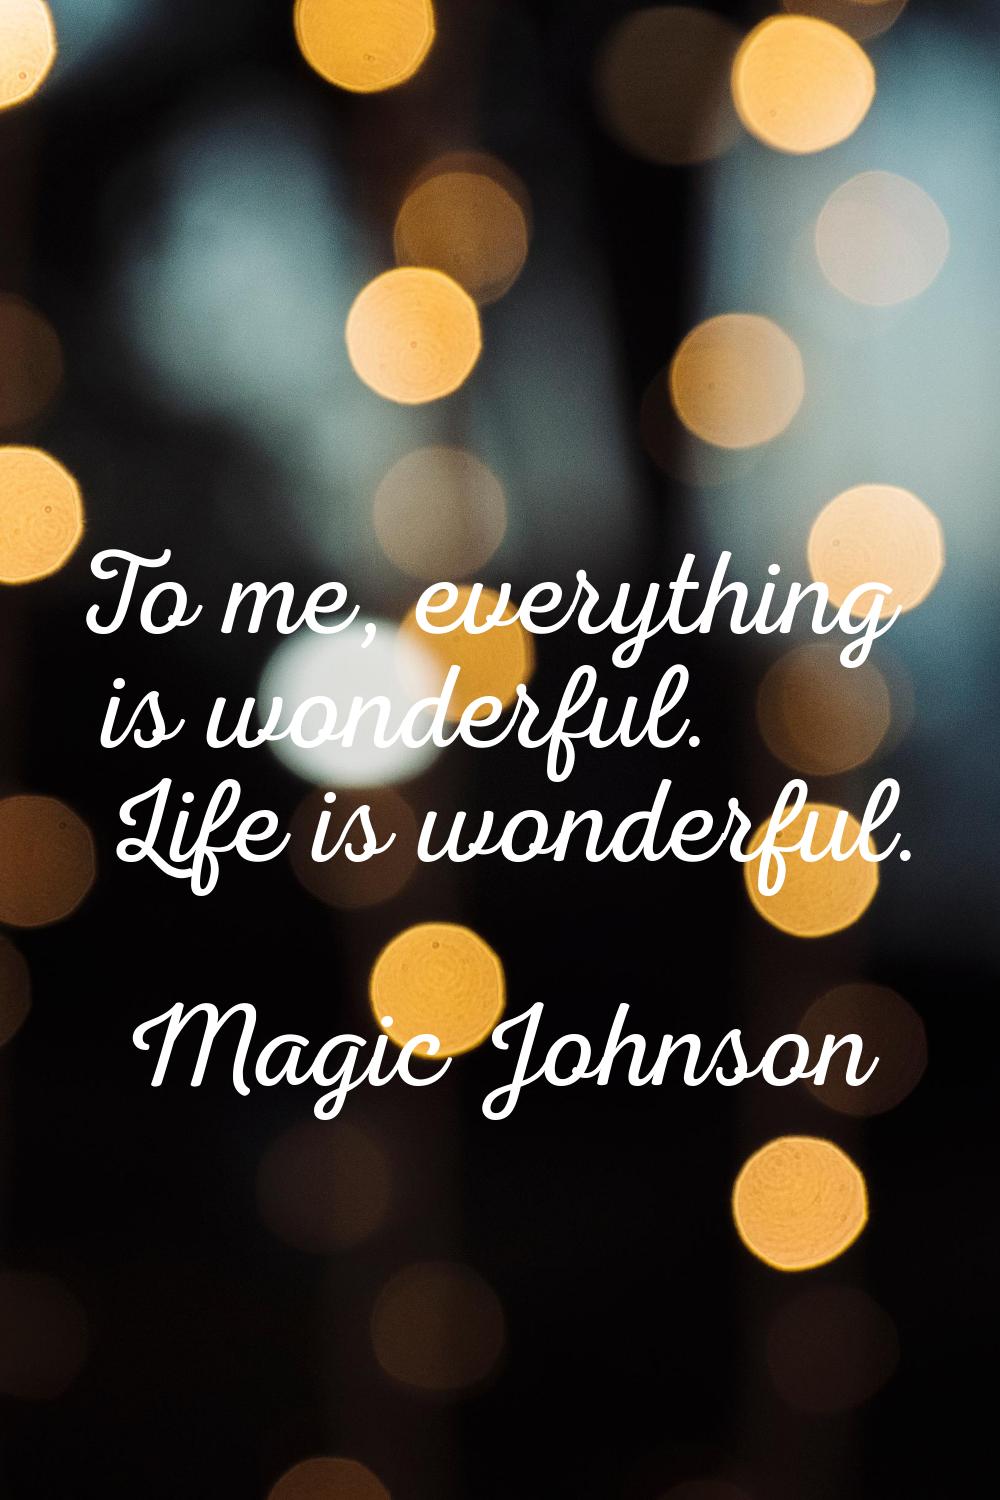 To me, everything is wonderful. Life is wonderful.